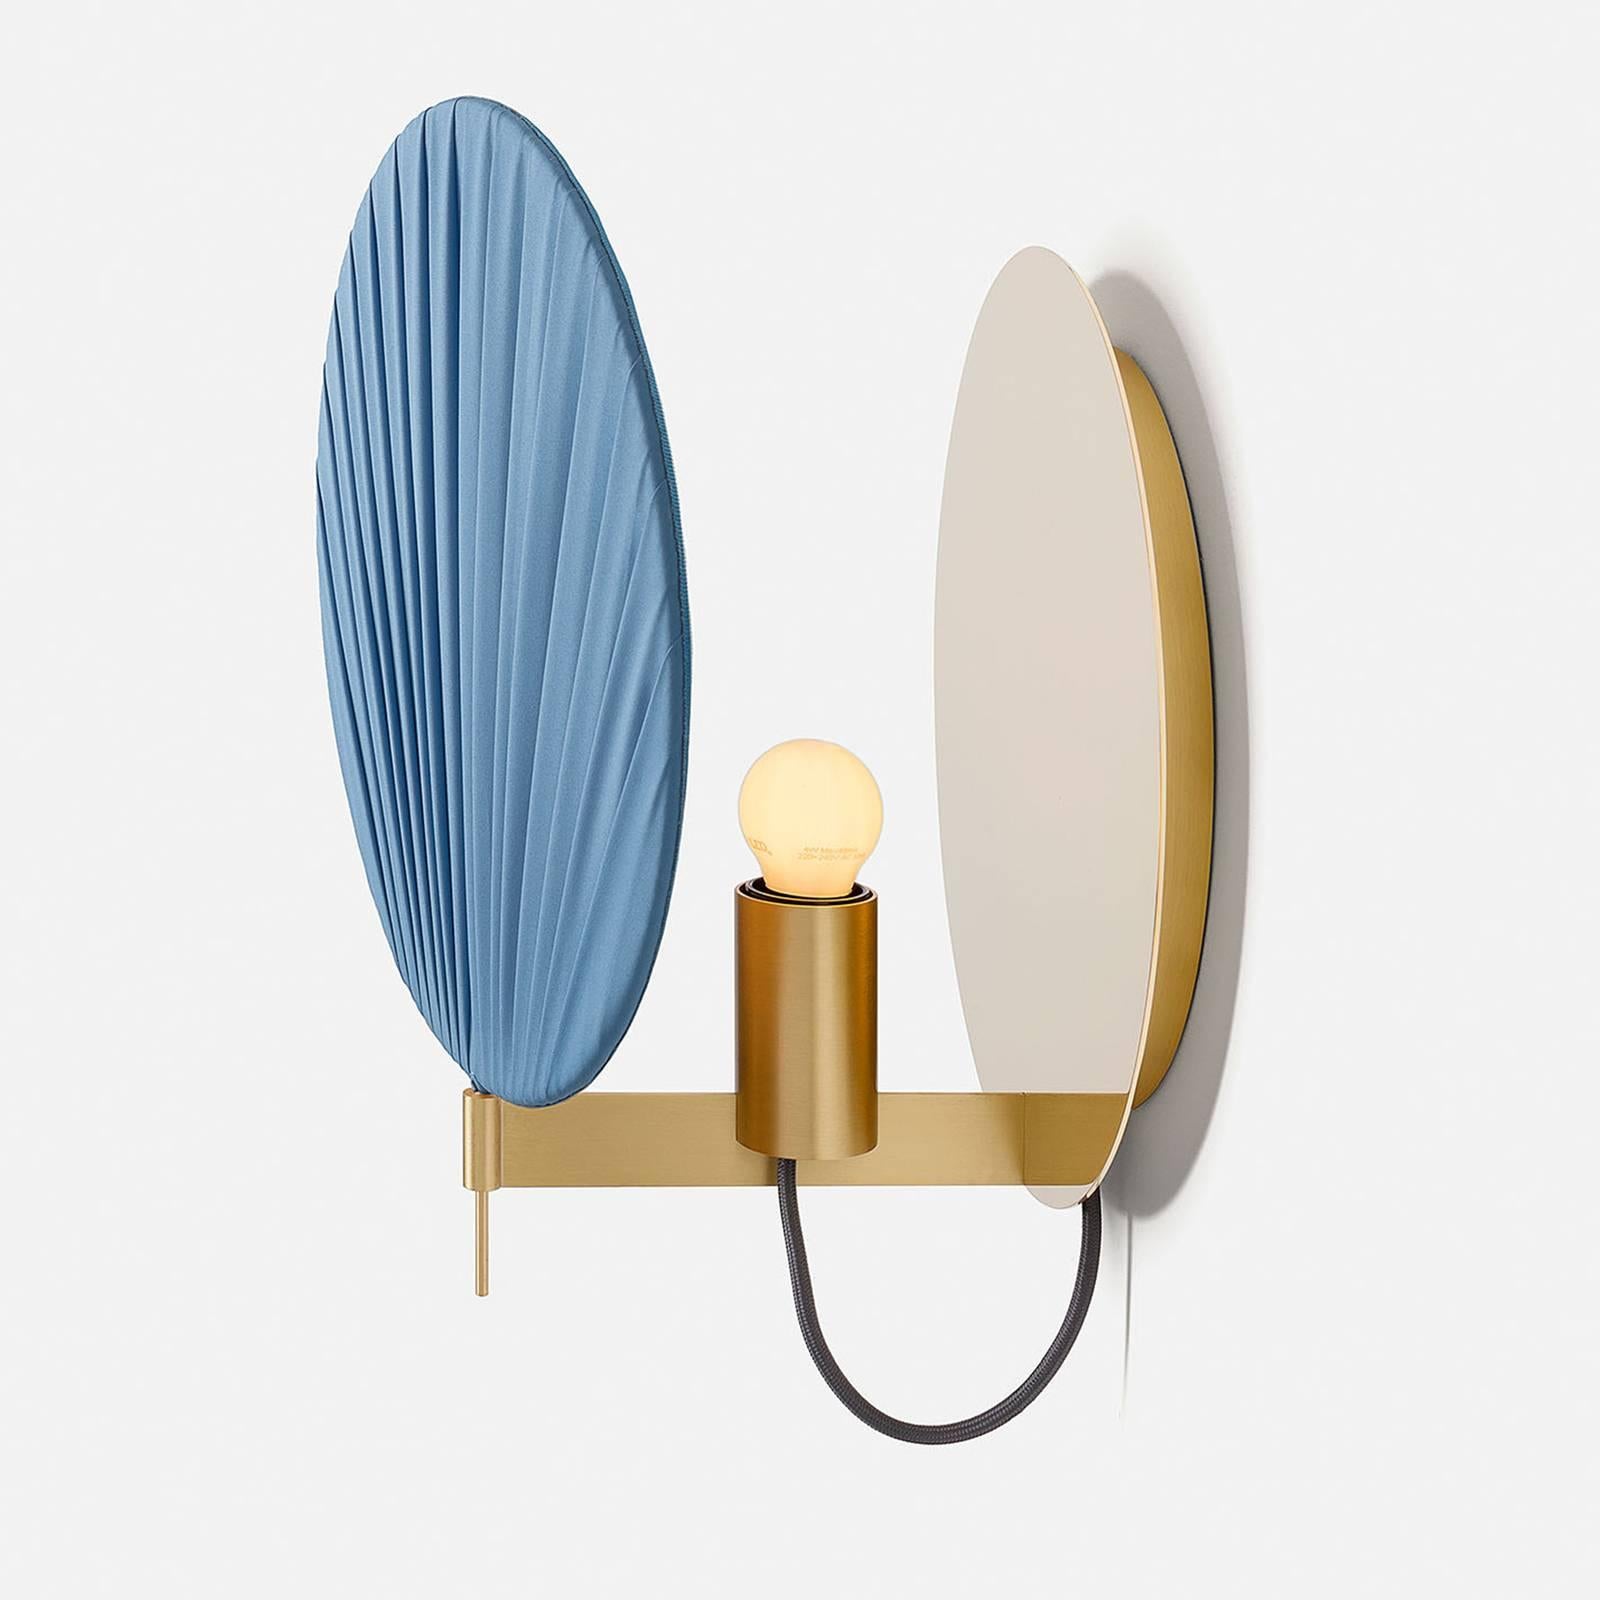 A sophisticated piece of functional decor that will enrich a modern home, this wall lamp features a structure made up of a solid brass disk attached to the wall and a bracket in natural-finished brass. The shade is made of a disk of plated organza,